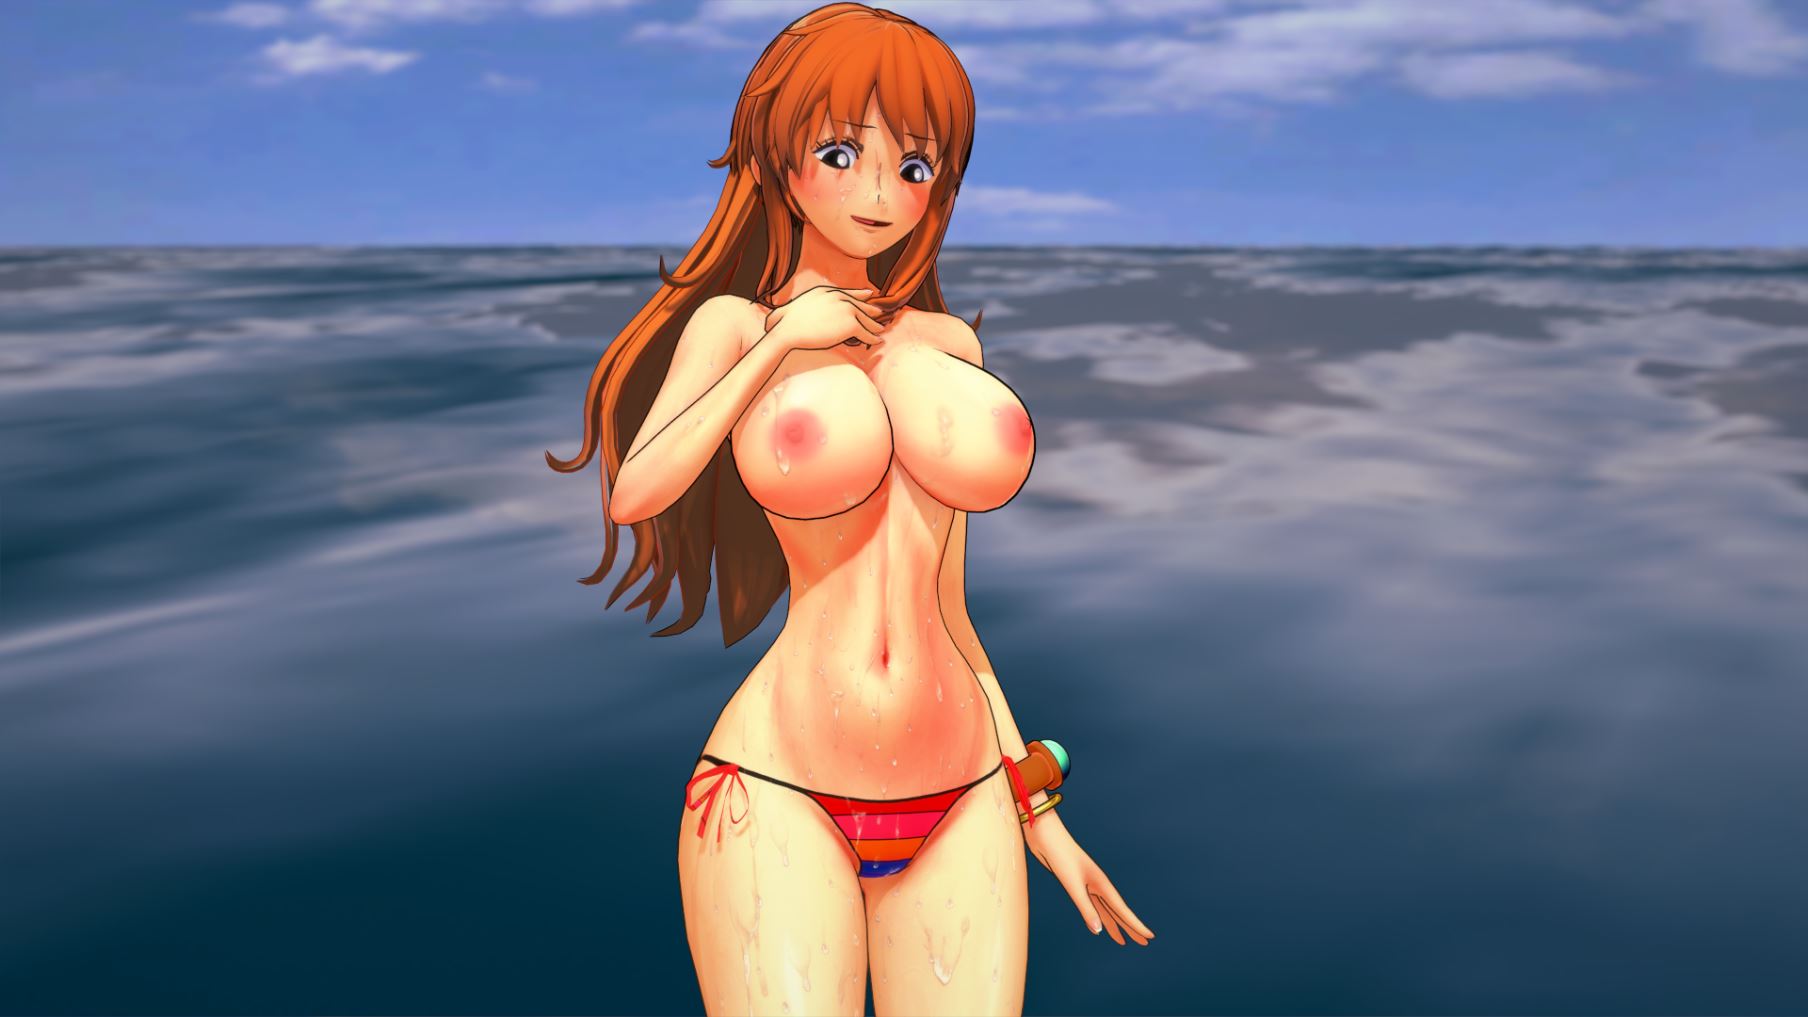 Sea Xxx - One Piece: Lost at Sea Ren'Py Porn Sex Game v.0.1a Download for Windows,  MacOS, Linux